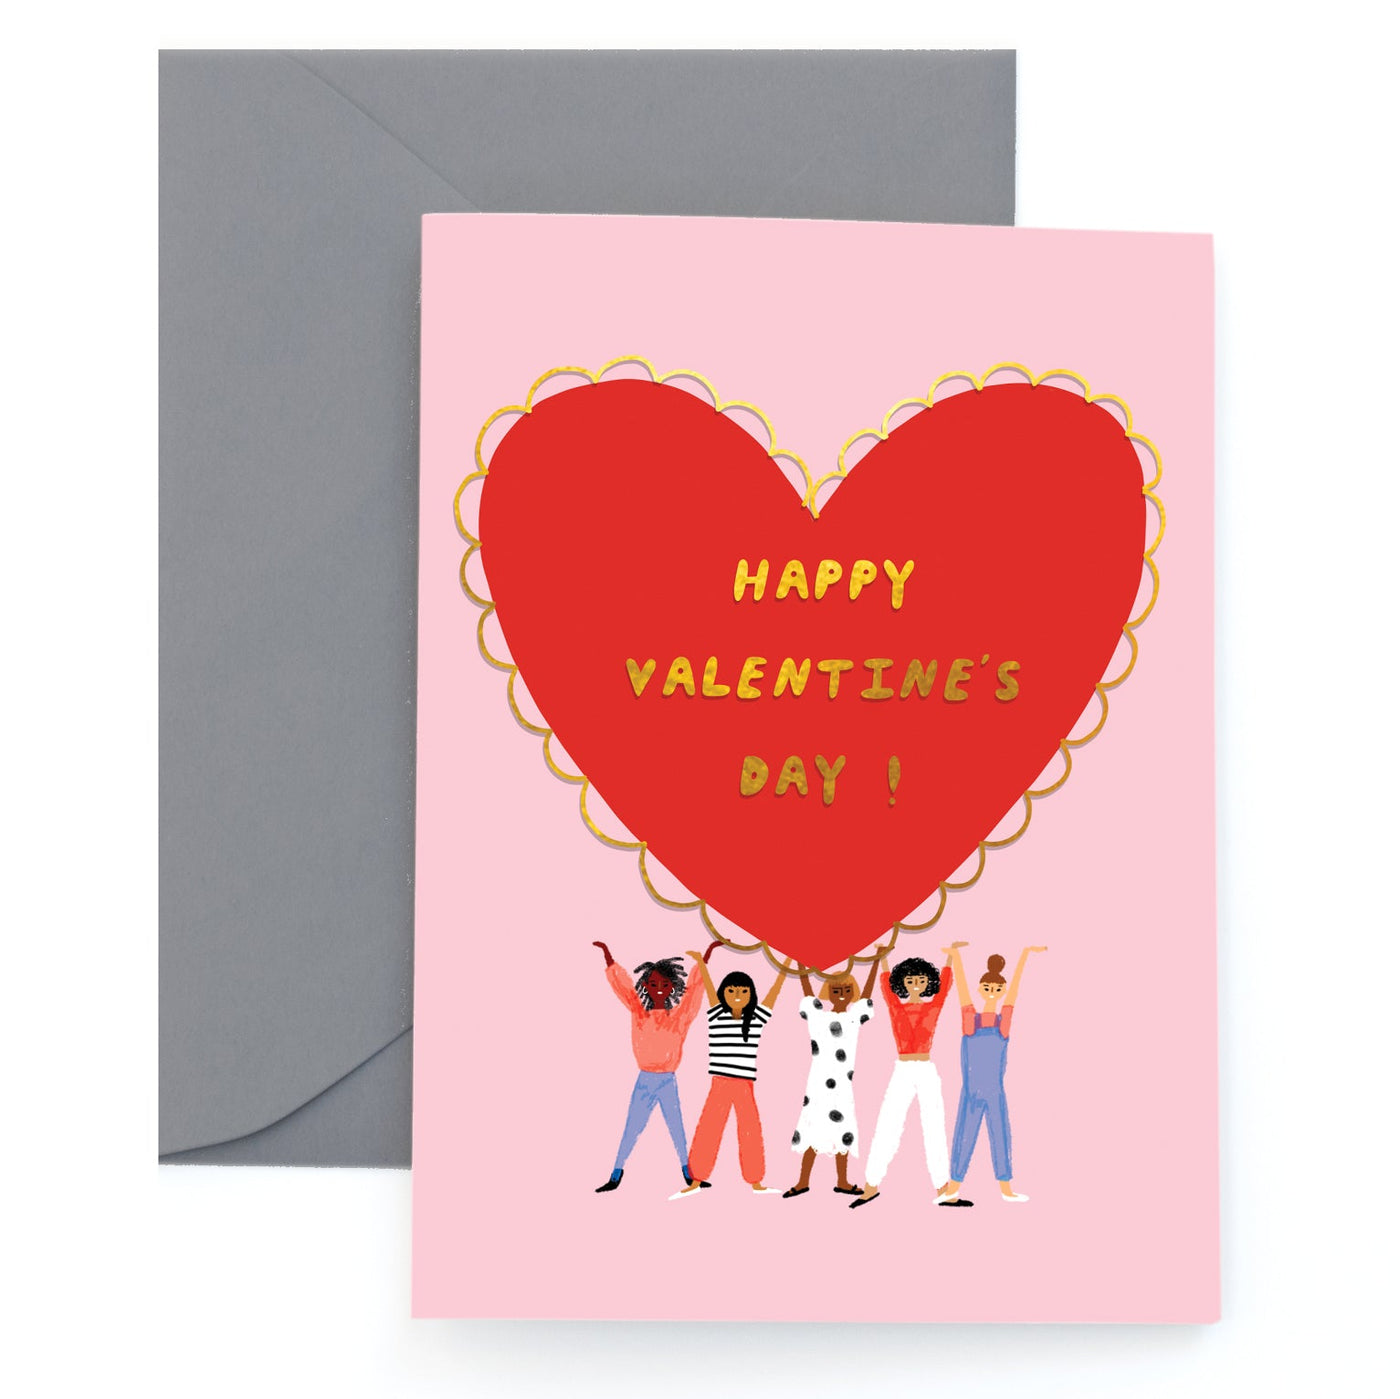 WE LOVE YOU - Valentine's Day Card